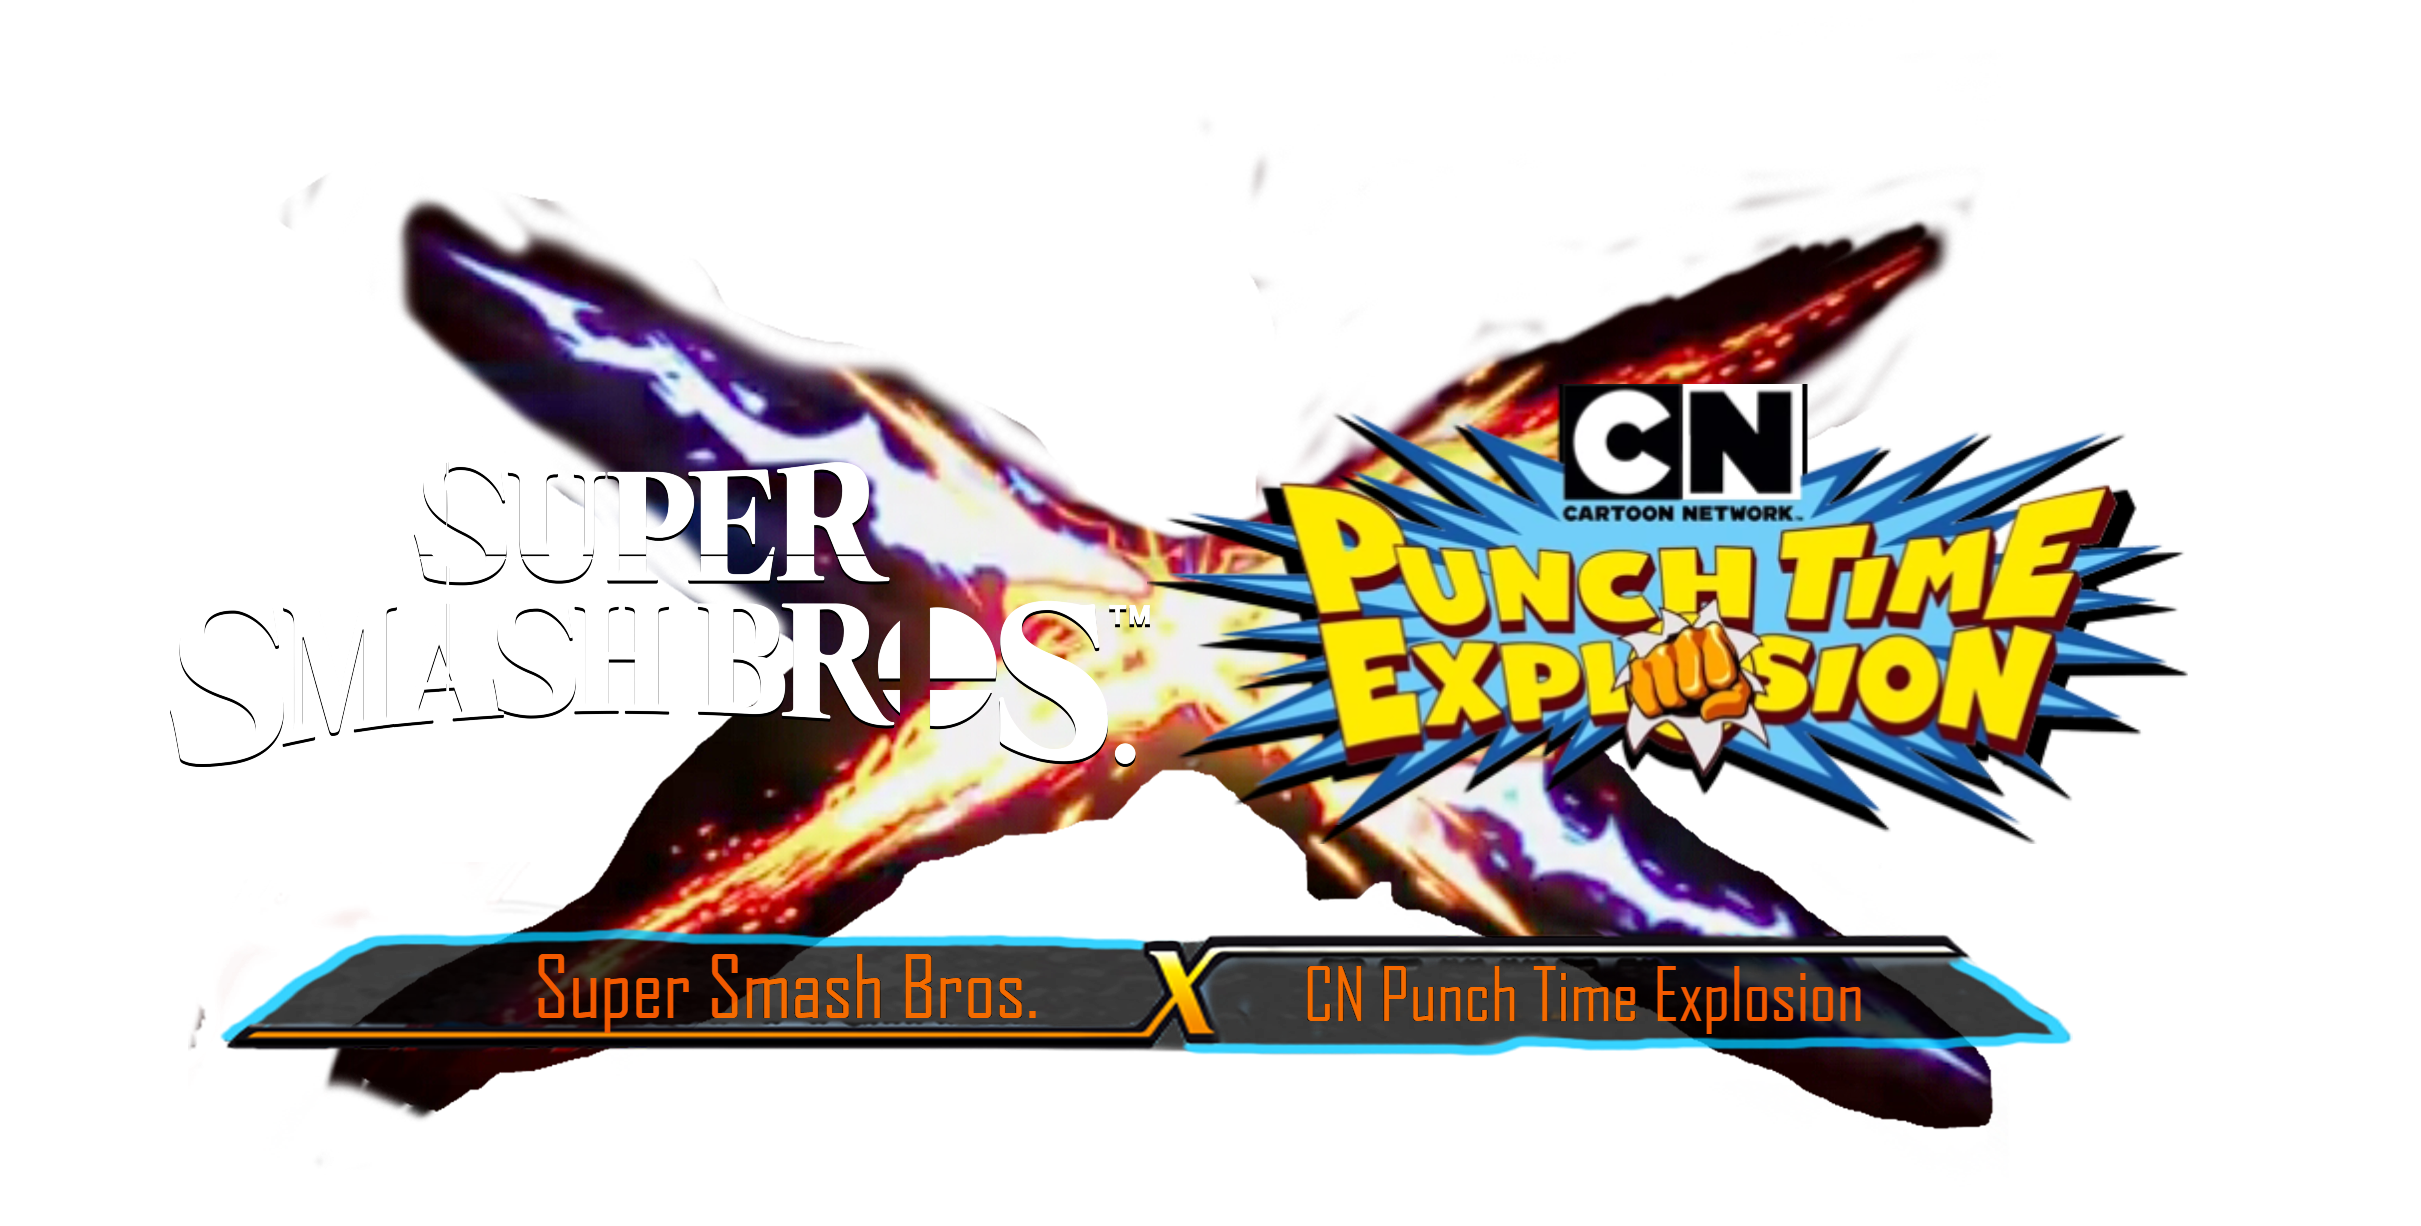 Cartoon Network: Punch Time Explosion - Wikipedia